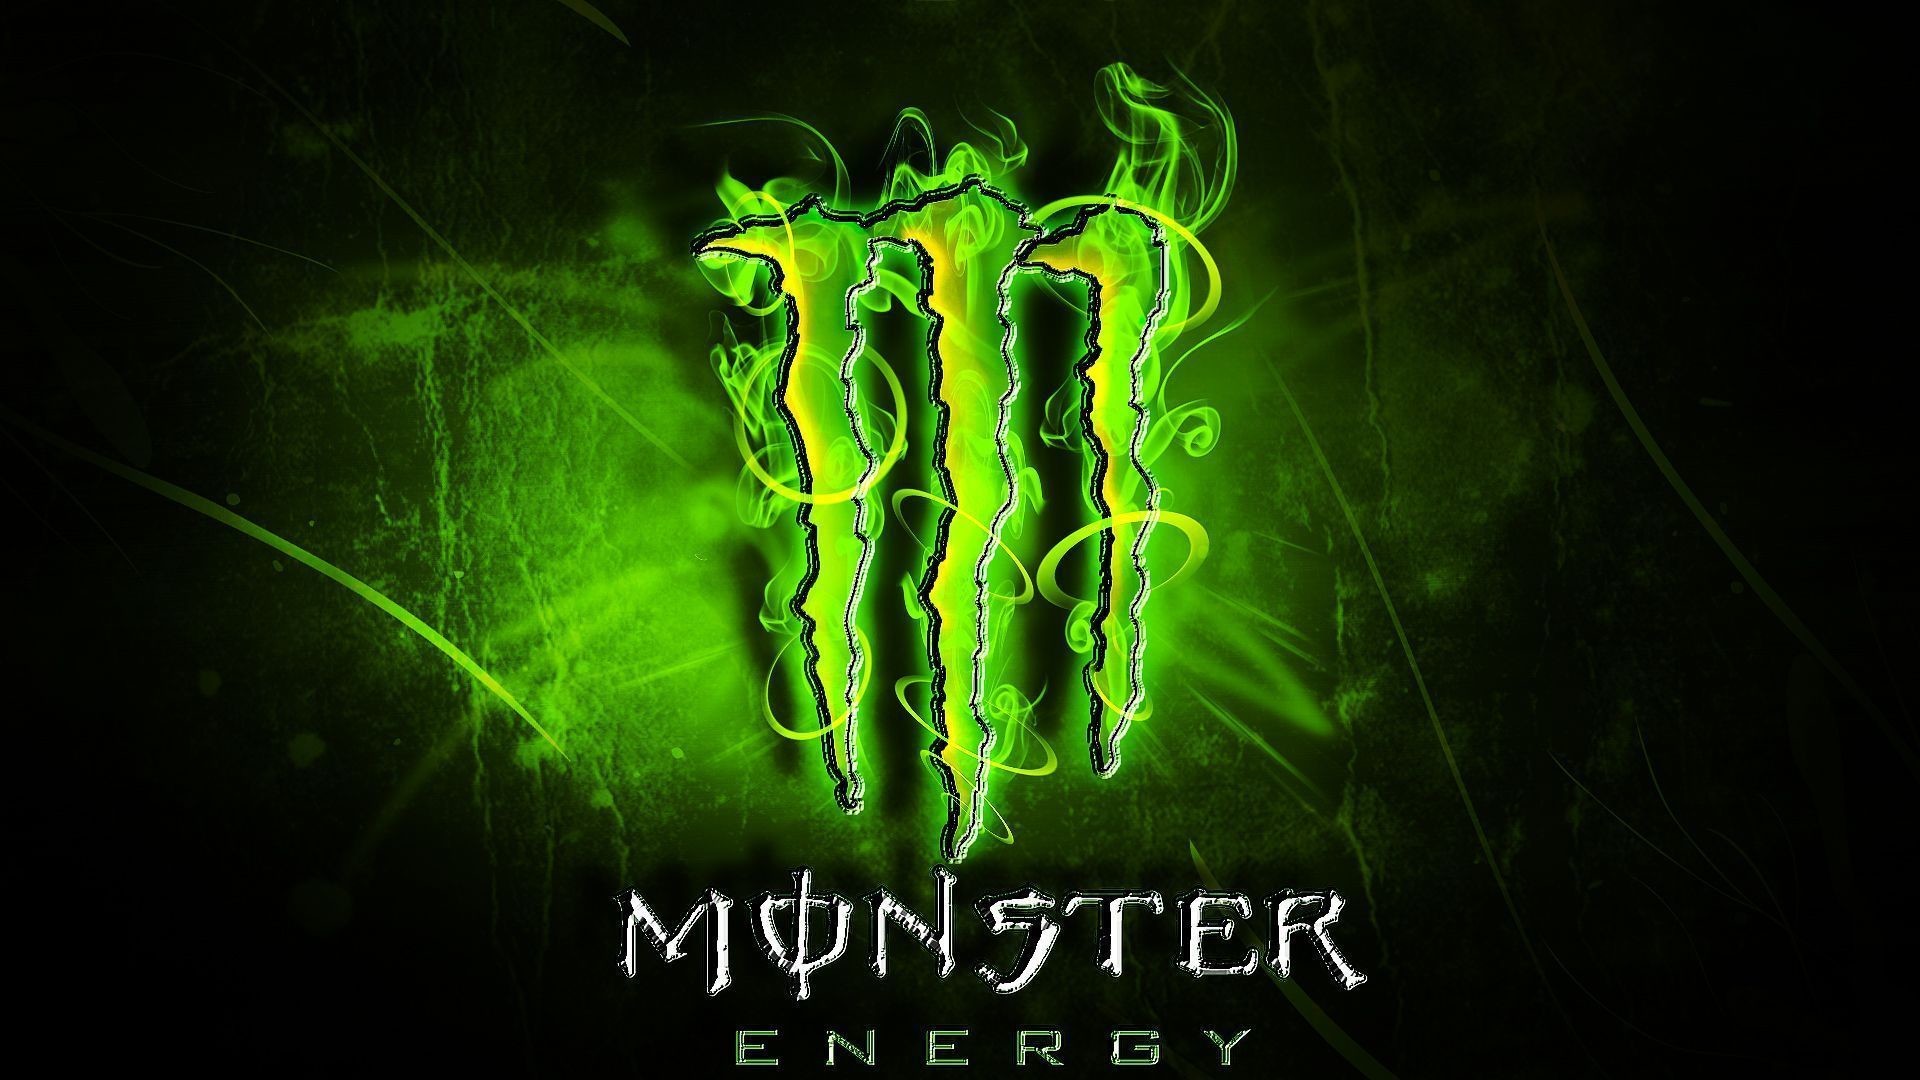 1920x1080 Full HD Monster Energy Download Wallpapers - Manualwall.com